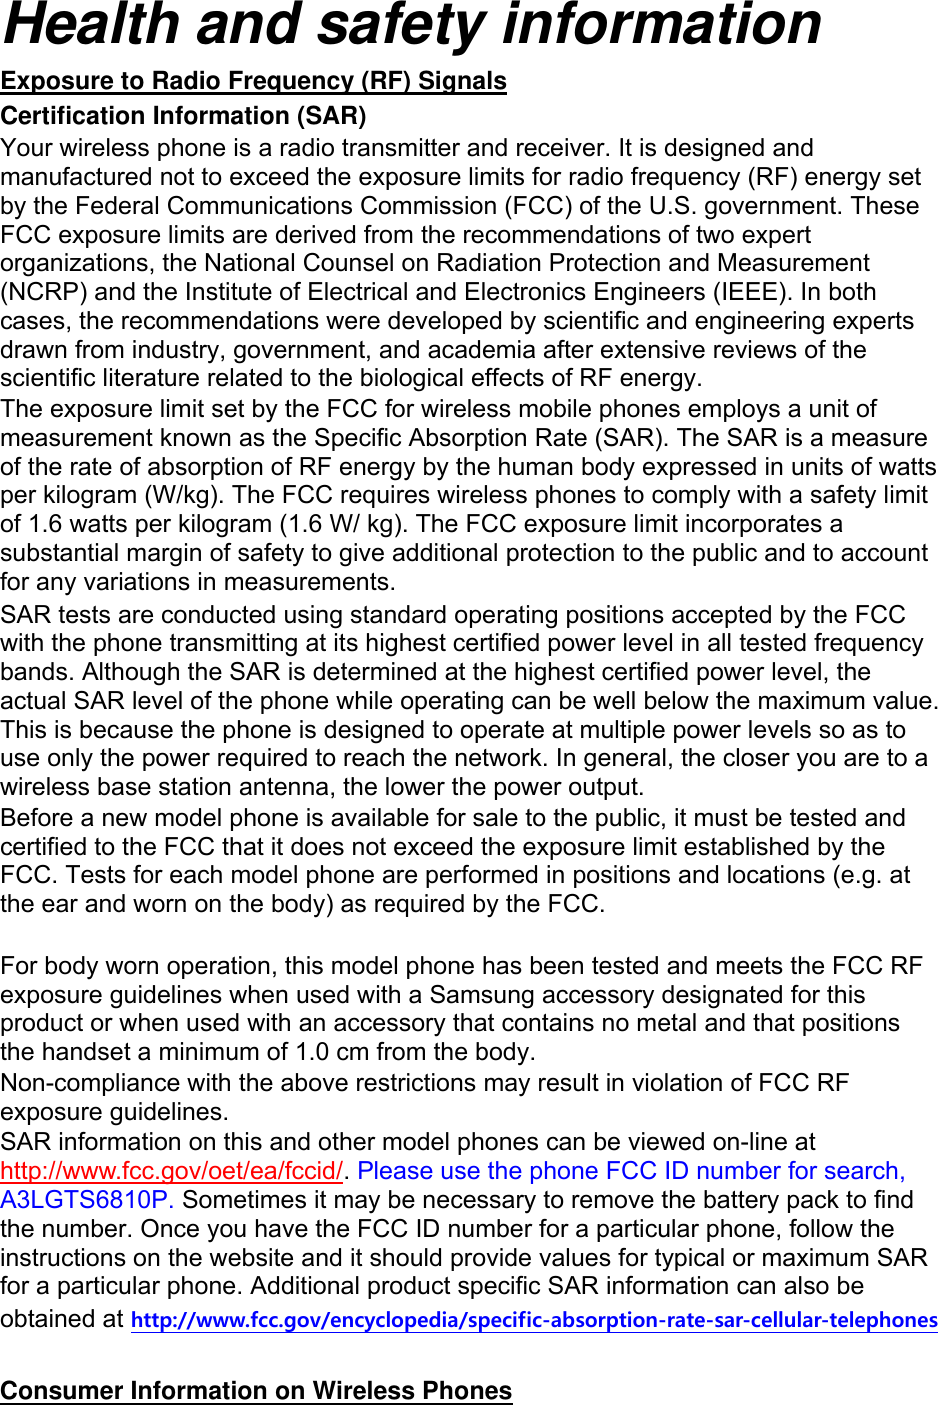 Health and safety information Exposure to Radio Frequency (RF) Signals Certification Information (SAR) Your wireless phone is a radio transmitter and receiver. It is designed and manufactured not to exceed the exposure limits for radio frequency (RF) energy set by the Federal Communications Commission (FCC) of the U.S. government. These FCC exposure limits are derived from the recommendations of two expert organizations, the National Counsel on Radiation Protection and Measurement (NCRP) and the Institute of Electrical and Electronics Engineers (IEEE). In both cases, the recommendations were developed by scientific and engineering experts drawn from industry, government, and academia after extensive reviews of the scientific literature related to the biological effects of RF energy. The exposure limit set by the FCC for wireless mobile phones employs a unit of measurement known as the Specific Absorption Rate (SAR). The SAR is a measure of the rate of absorption of RF energy by the human body expressed in units of watts per kilogram (W/kg). The FCC requires wireless phones to comply with a safety limit of 1.6 watts per kilogram (1.6 W/ kg). The FCC exposure limit incorporates a substantial margin of safety to give additional protection to the public and to account for any variations in measurements. SAR tests are conducted using standard operating positions accepted by the FCC with the phone transmitting at its highest certified power level in all tested frequency bands. Although the SAR is determined at the highest certified power level, the actual SAR level of the phone while operating can be well below the maximum value. This is because the phone is designed to operate at multiple power levels so as to use only the power required to reach the network. In general, the closer you are to a wireless base station antenna, the lower the power output. Before a new model phone is available for sale to the public, it must be tested and certified to the FCC that it does not exceed the exposure limit established by the FCC. Tests for each model phone are performed in positions and locations (e.g. at the ear and worn on the body) as required by the FCC.      For body worn operation, this model phone has been tested and meets the FCC RF exposure guidelines when used with a Samsung accessory designated for this product or when used with an accessory that contains no metal and that positions the handset a minimum of 1.0 cm from the body.   Non-compliance with the above restrictions may result in violation of FCC RF exposure guidelines. SAR information on this and other model phones can be viewed on-line at http://www.fcc.gov/oet/ea/fccid/. Please use the phone FCC ID number for search, A3LGTS6810P. Sometimes it may be necessary to remove the battery pack to find the number. Once you have the FCC ID number for a particular phone, follow the instructions on the website and it should provide values for typical or maximum SAR for a particular phone. Additional product specific SAR information can also be obtained at http://www.fcc.gov/encyclopedia/specific-absorption-rate-sar-cellular-telephones  Consumer Information on Wireless Phones 